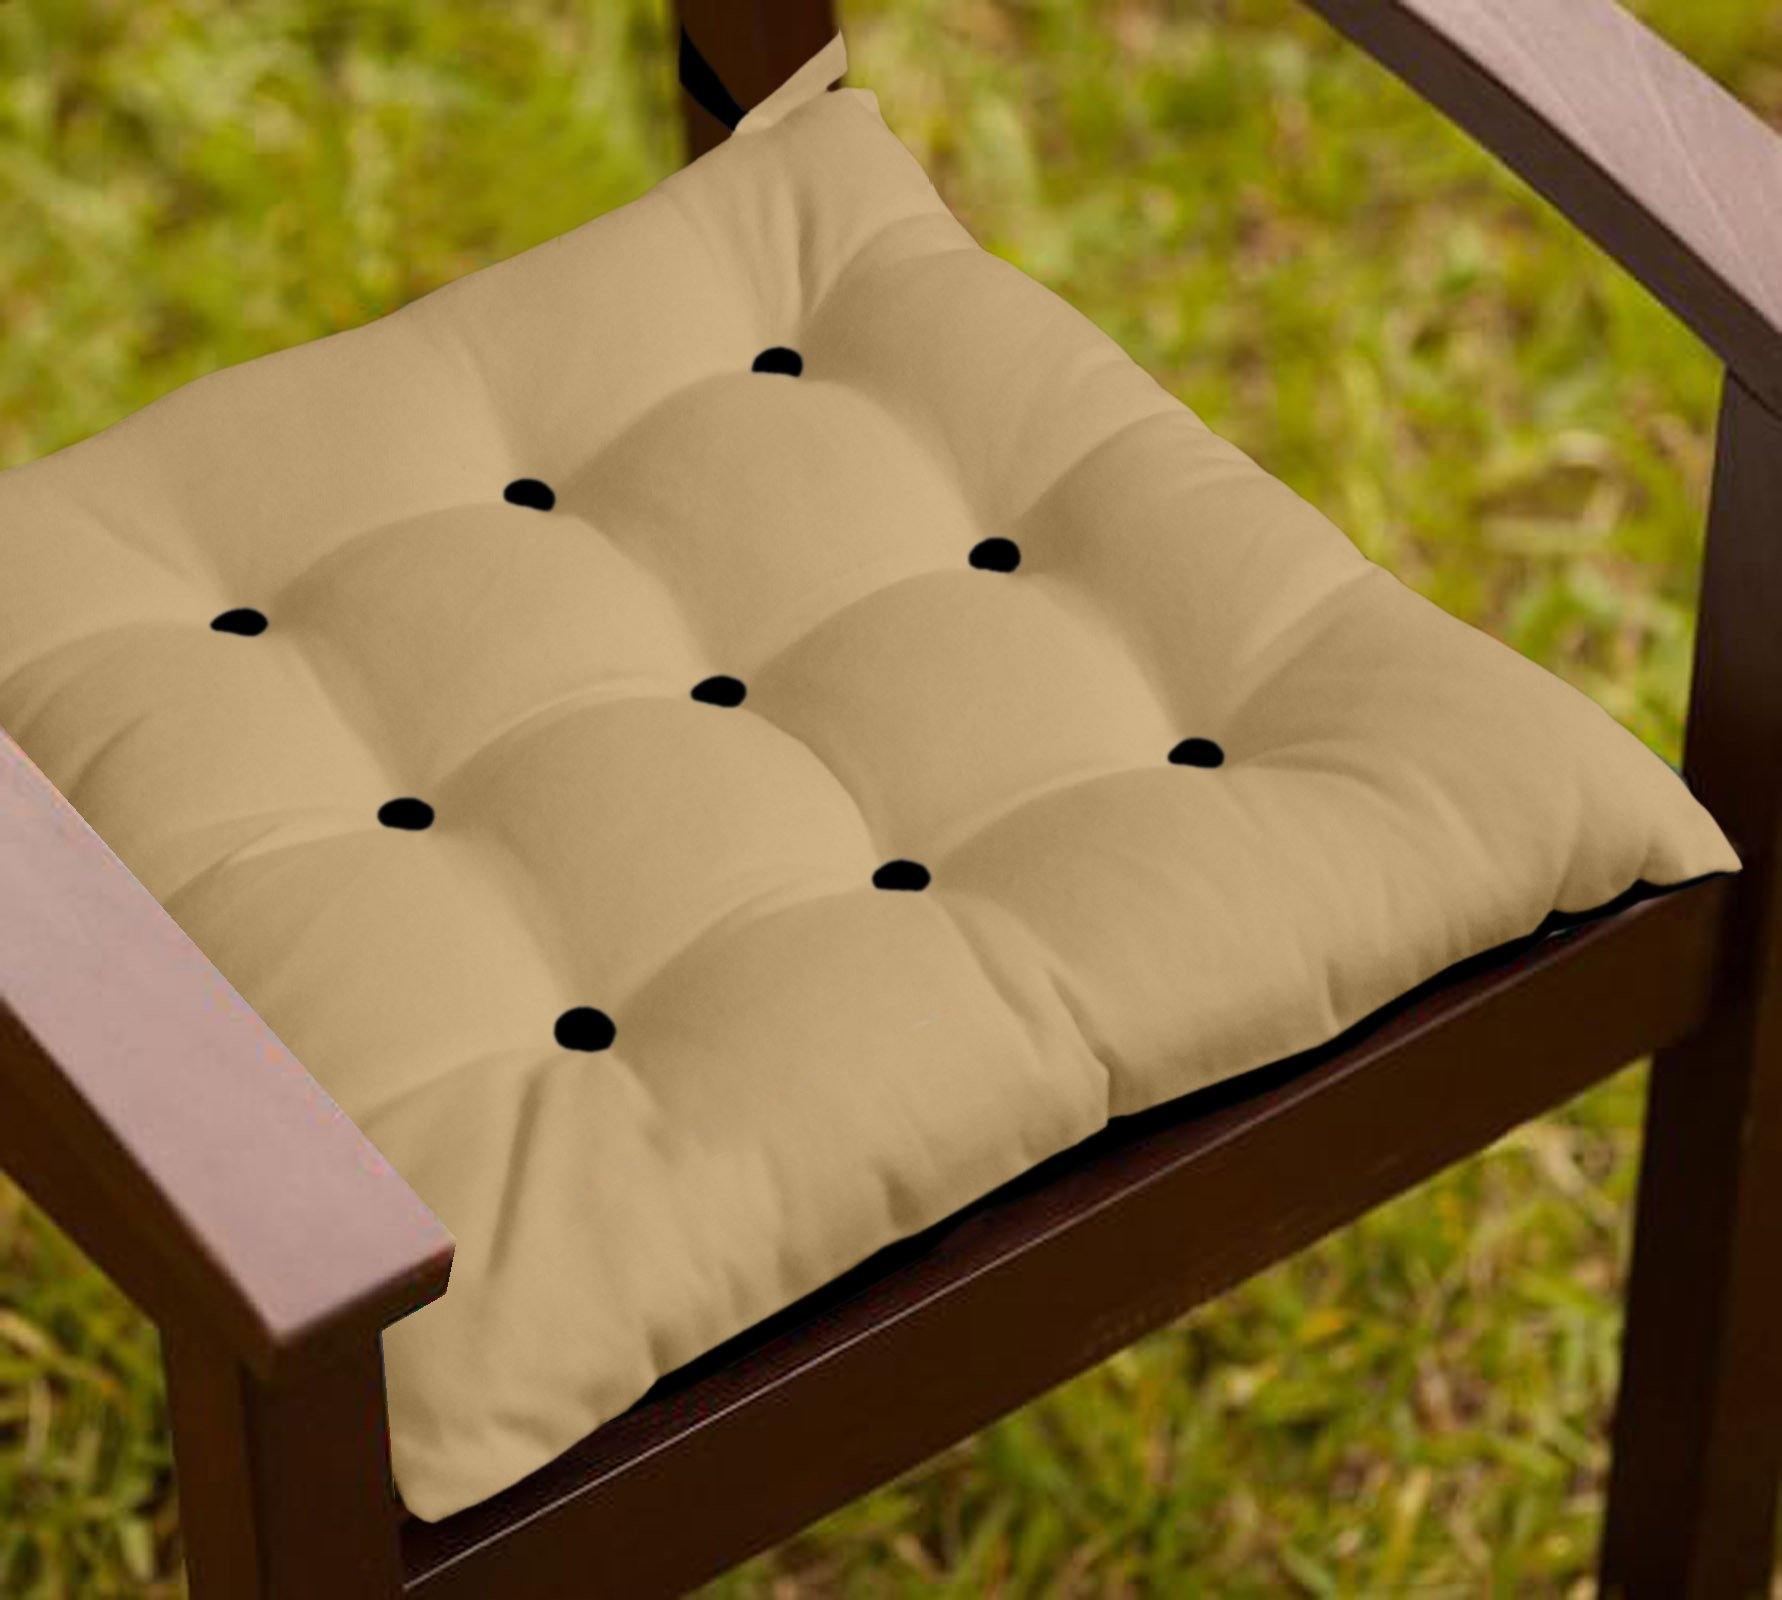 Lushomes Half Panama Bi-Color Sand and Pirate Black Chair Cushion with 9+9 Buttons and 4 Strings - Lushomes